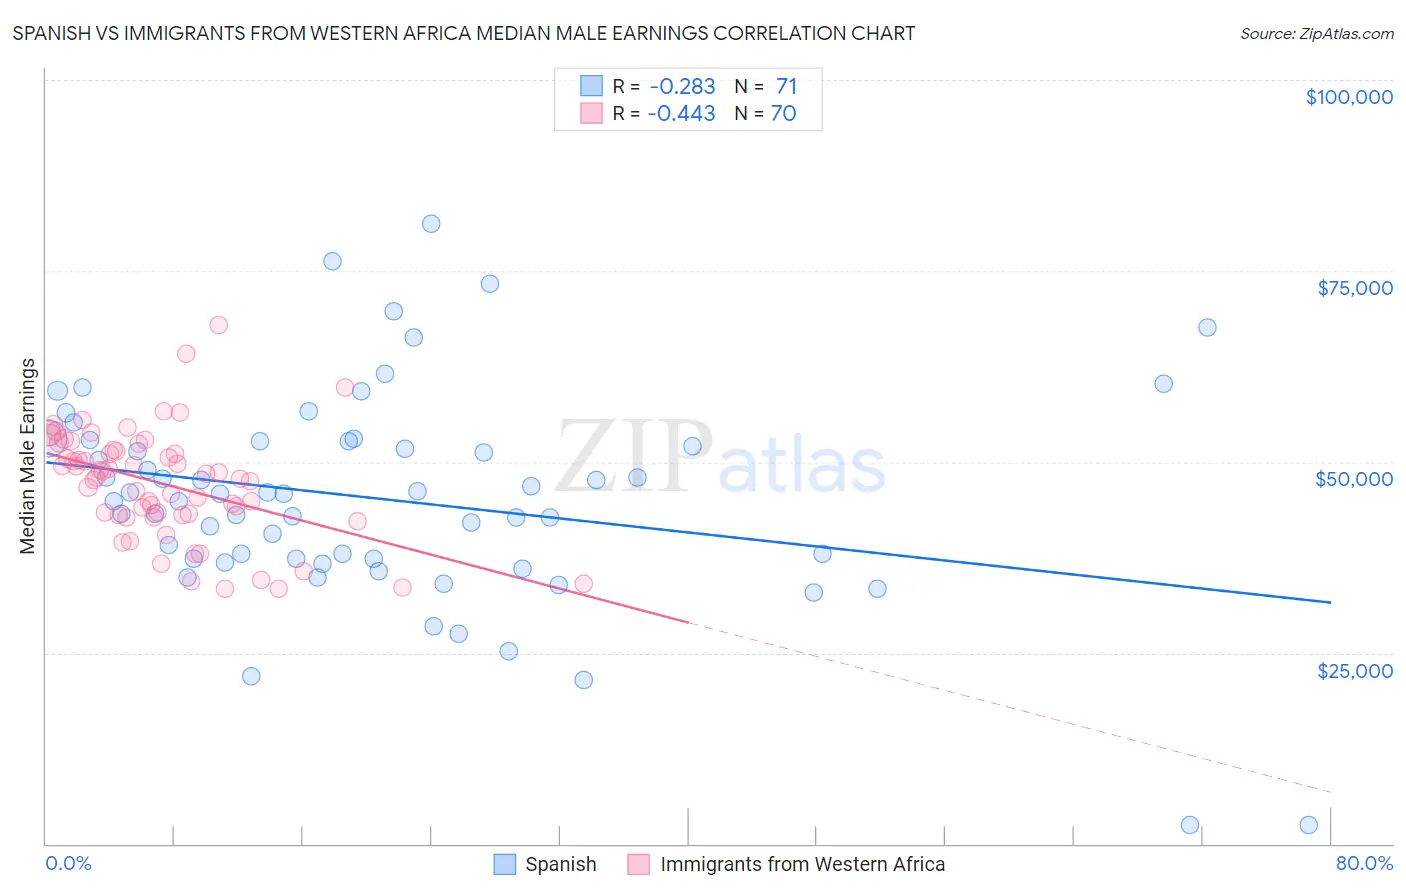 Spanish vs Immigrants from Western Africa Median Male Earnings